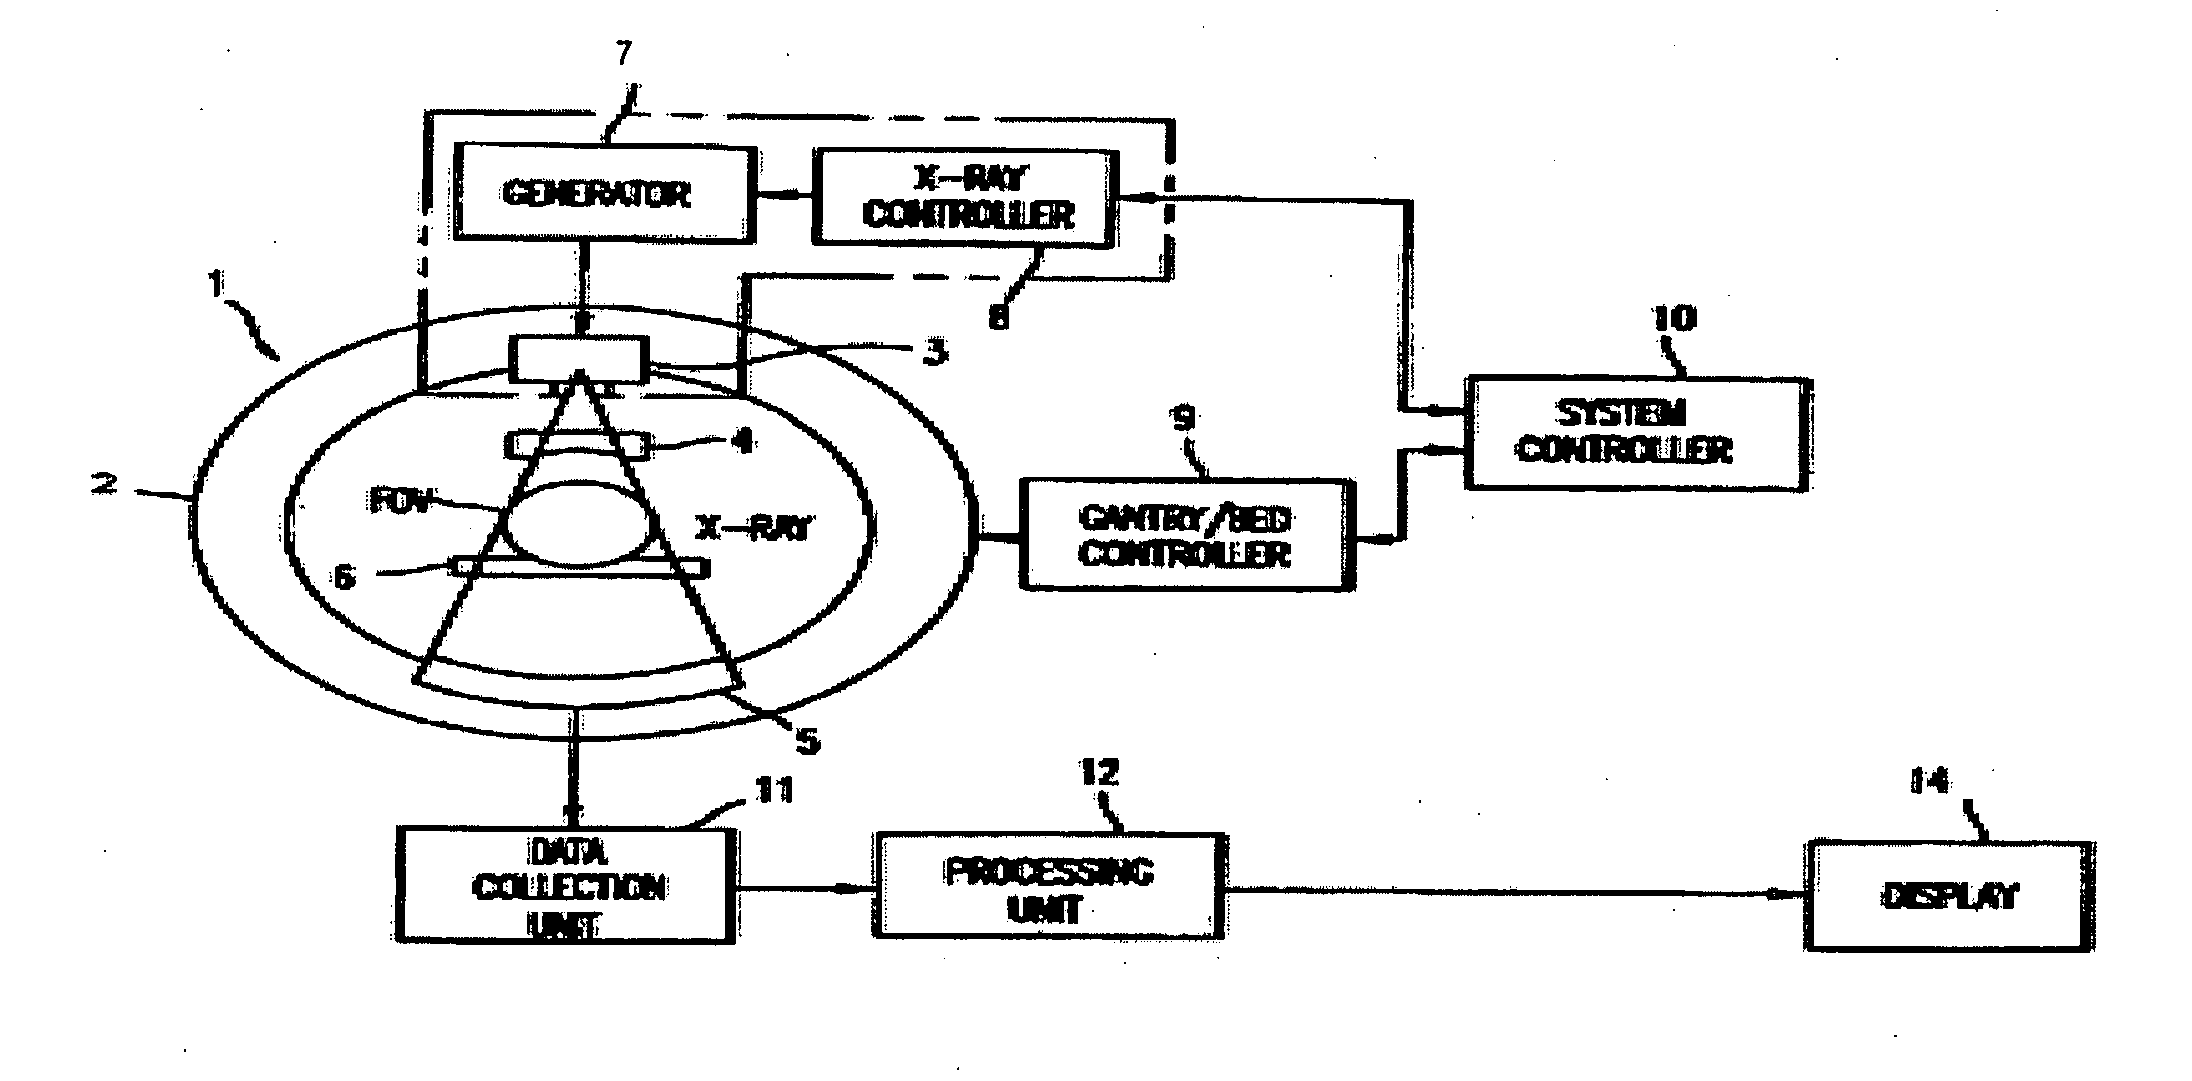 Method, apparatus, and computer program product for sinogram completion